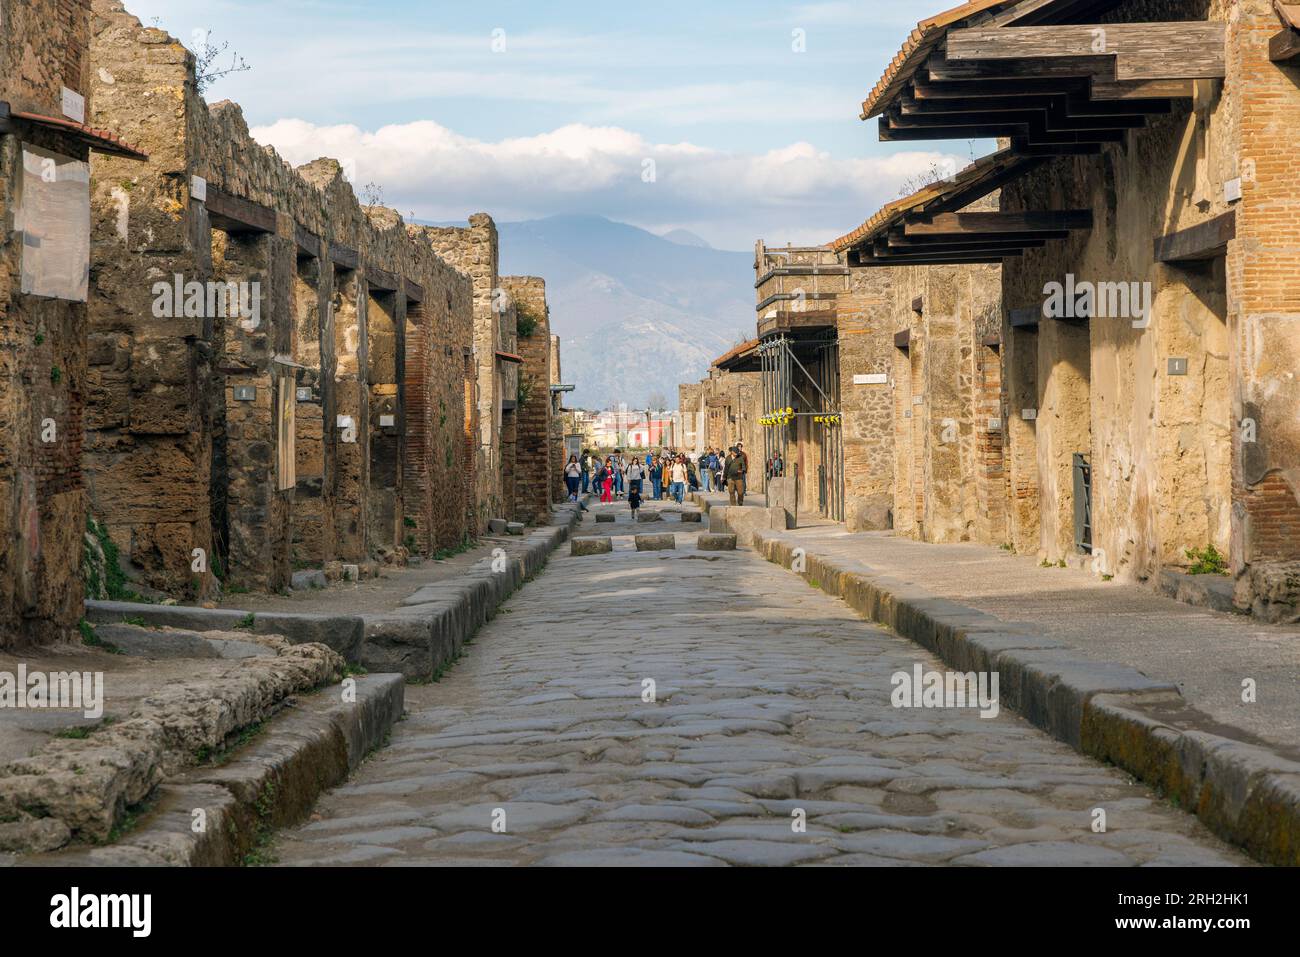 Pompeii Archaeological Site, Campania, Italy.  Via dell'abbondanza, one of the major streets in the city.  Pompeii, Herculaneum, and Torre Annunziata Stock Photo